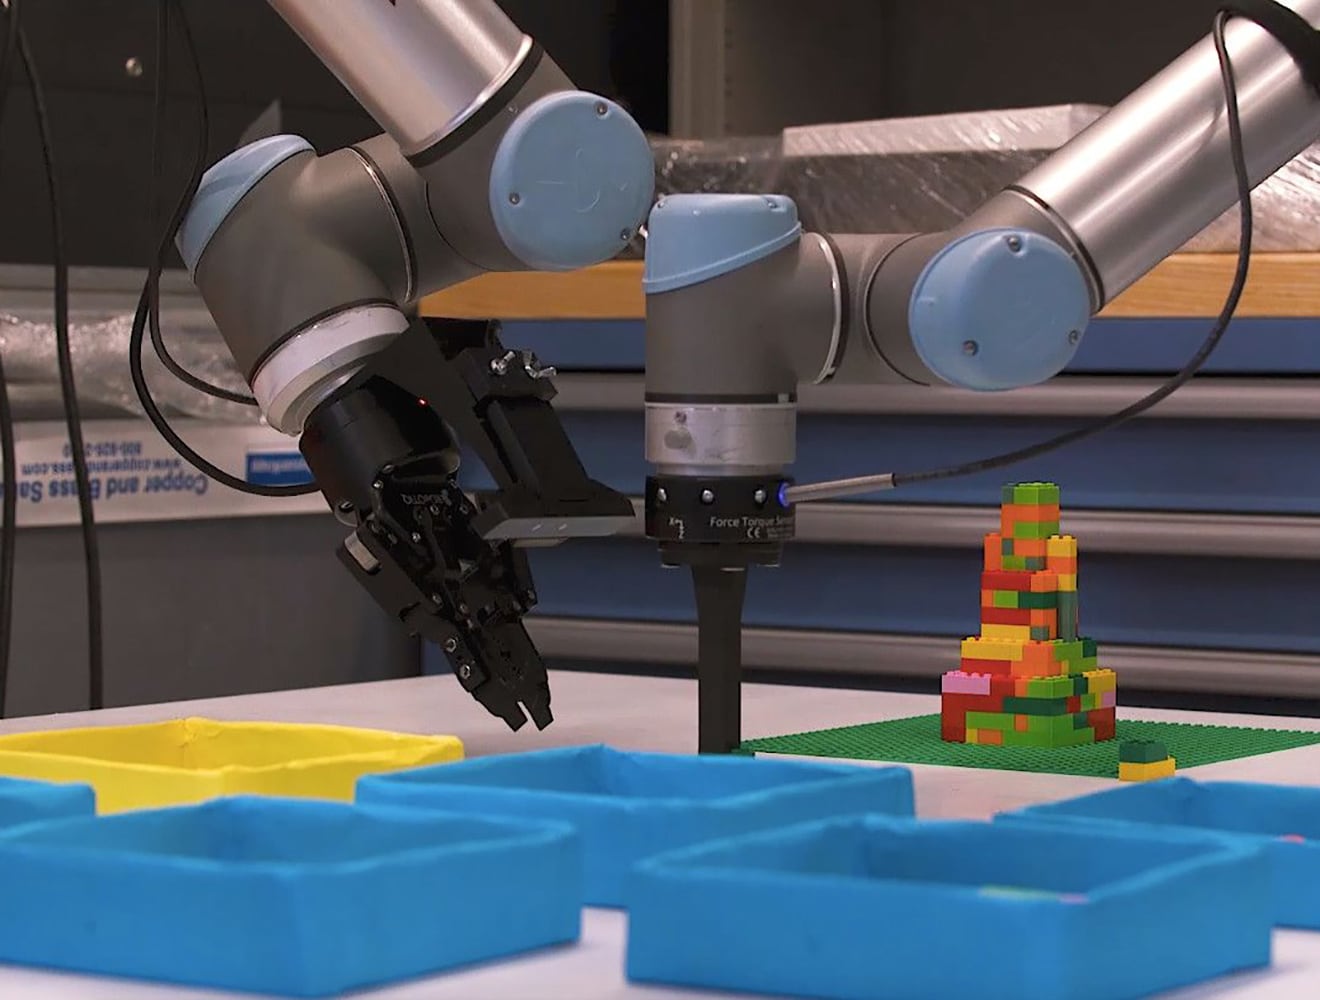 A robot places parts in a factory.